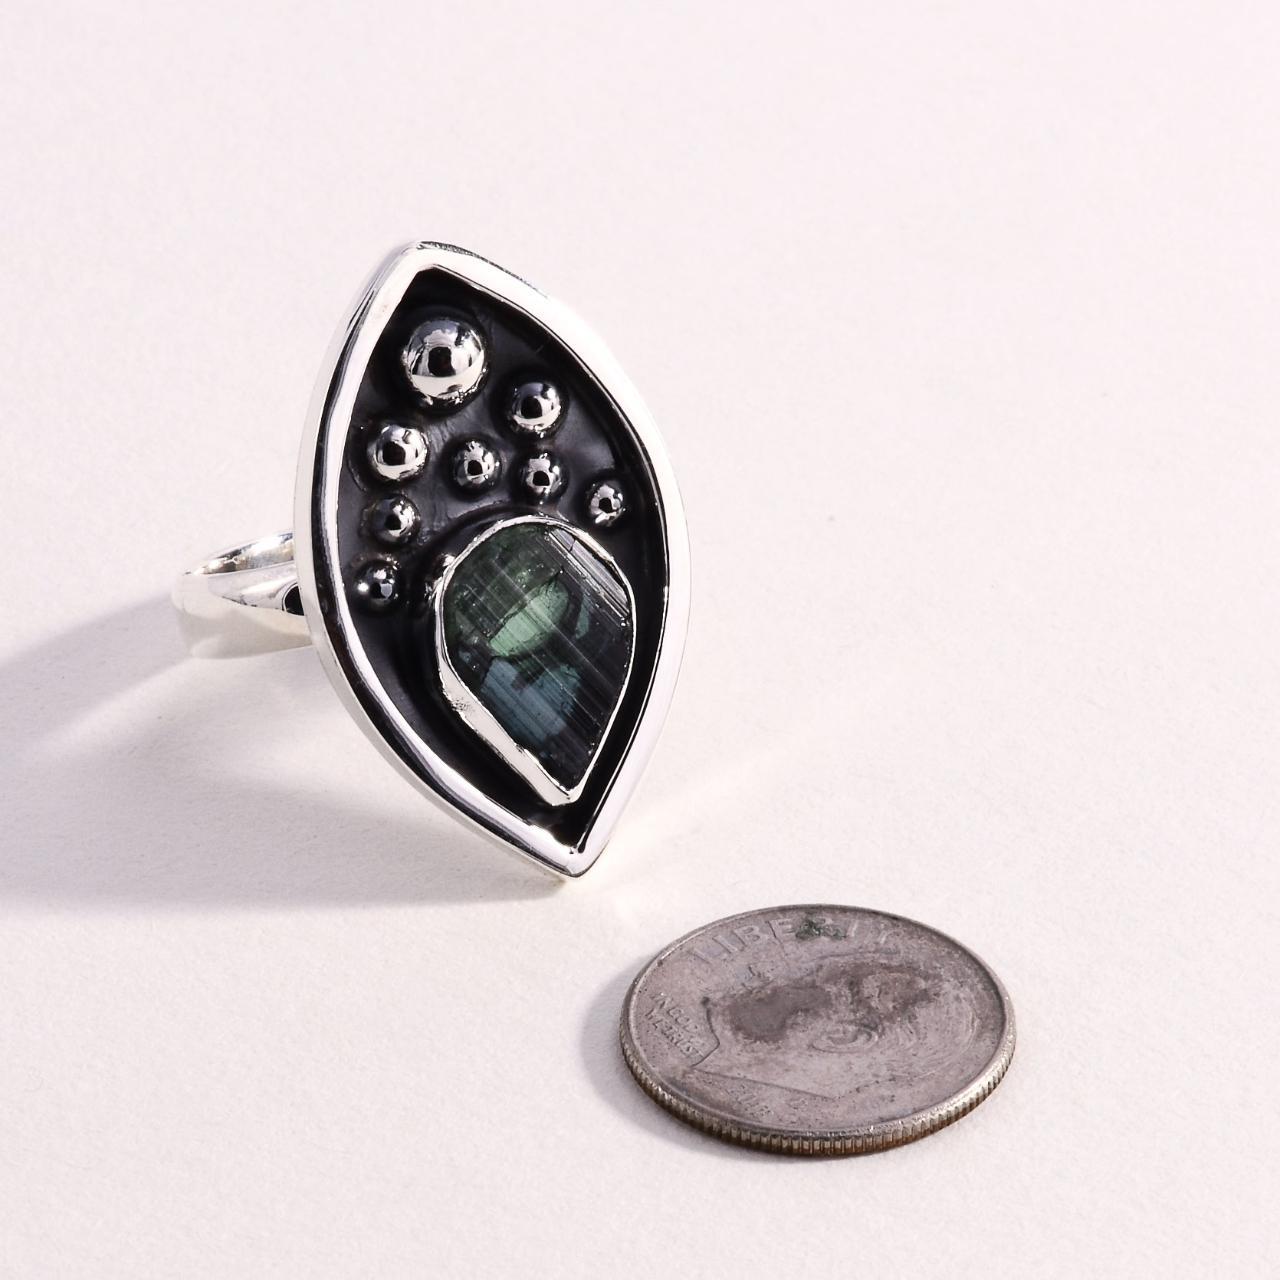 Product Image 3 - Sterling 925 Tourmaline Ring

Sterling Silver

Size